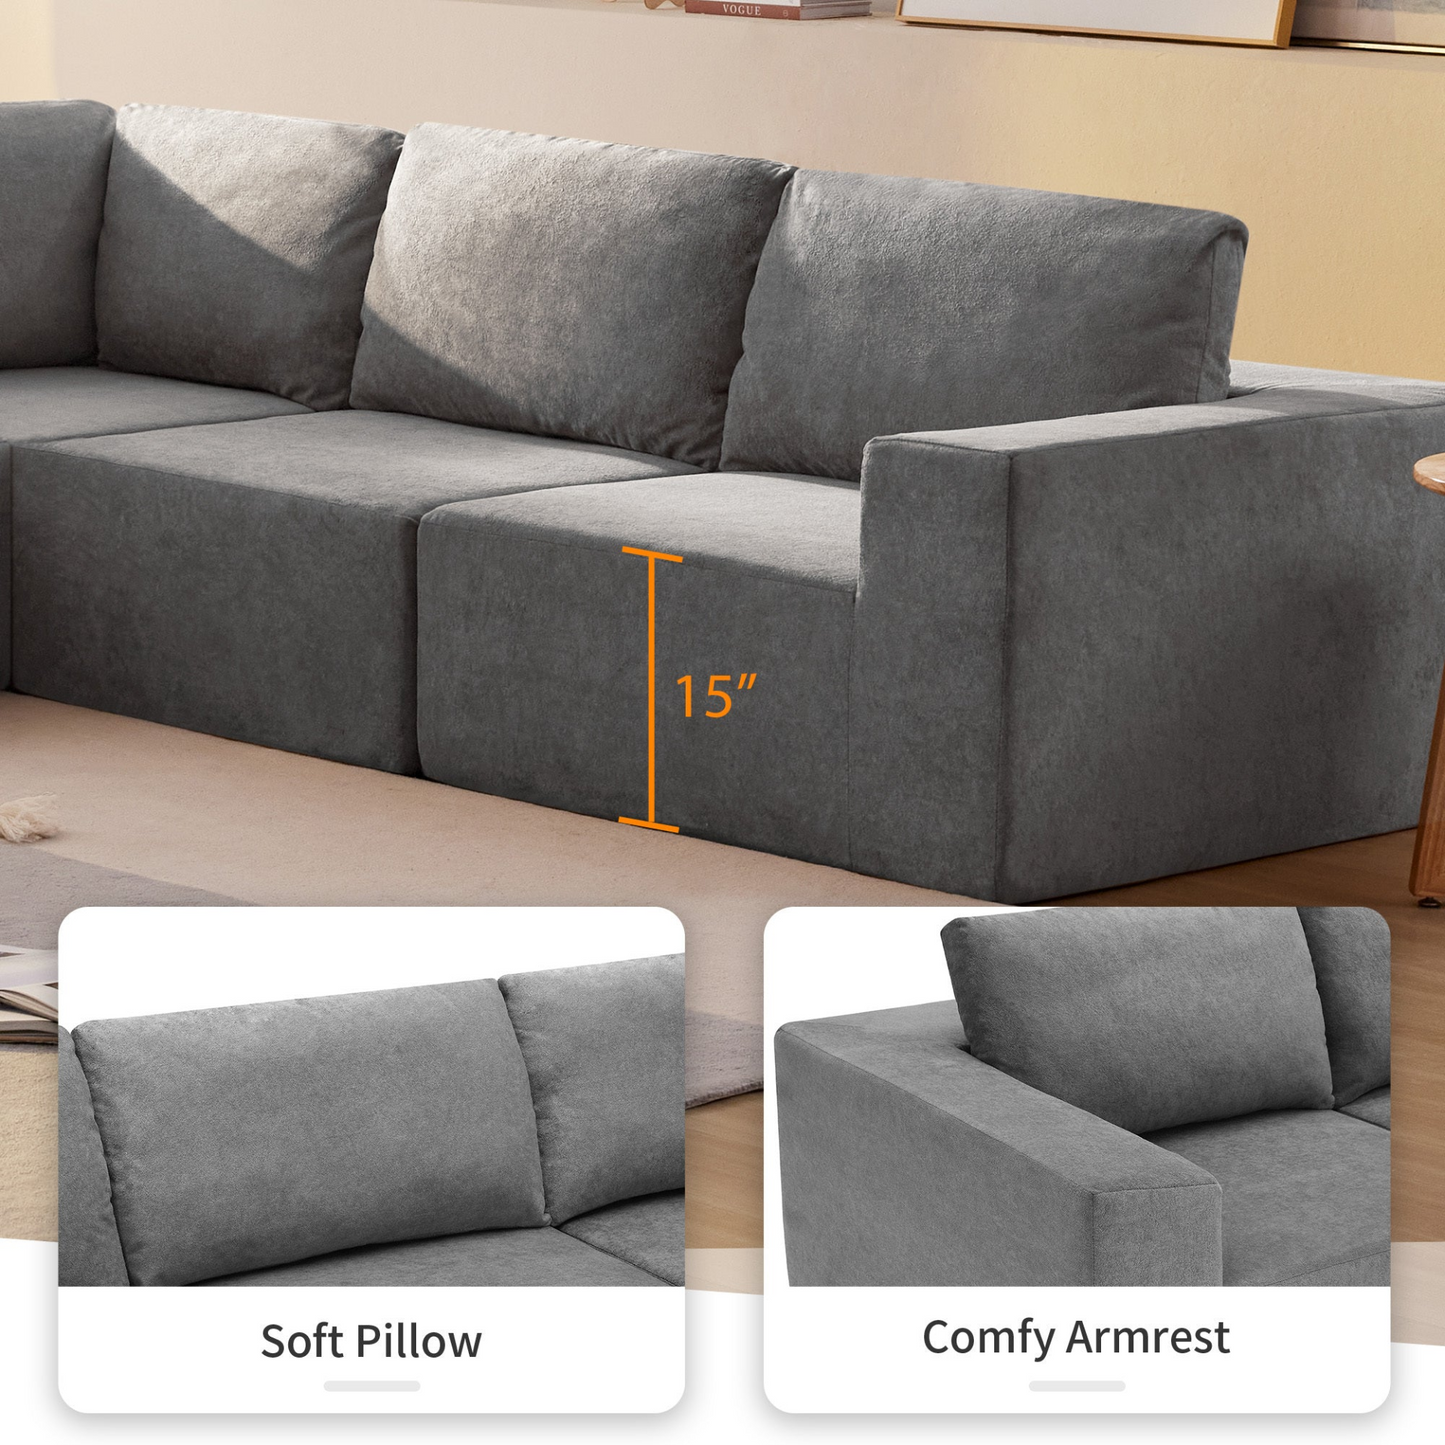 116*116" Modular L Shaped Sectional Sofa,Luxury Floor Couch Set,Upholstered Indoor Furniture,Foam-Filled Sleeper Sofa Bed for Living Room,Bedroom,5 PC Free Combination,3 Colors